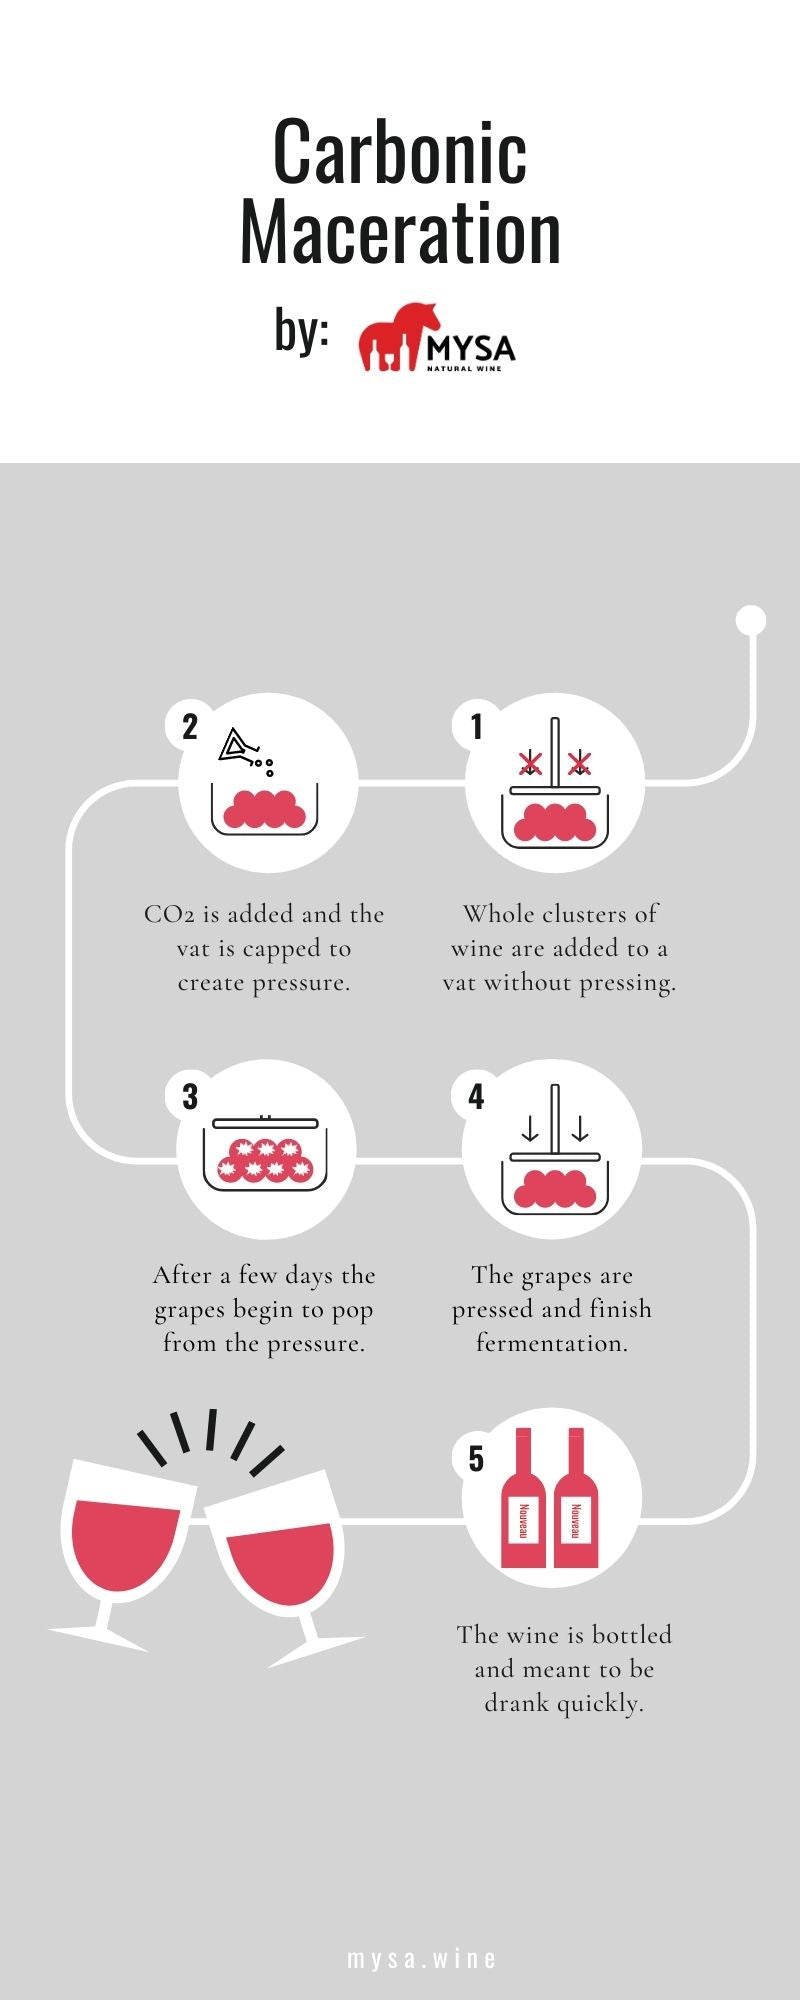 Carbonic Maceration Infographic